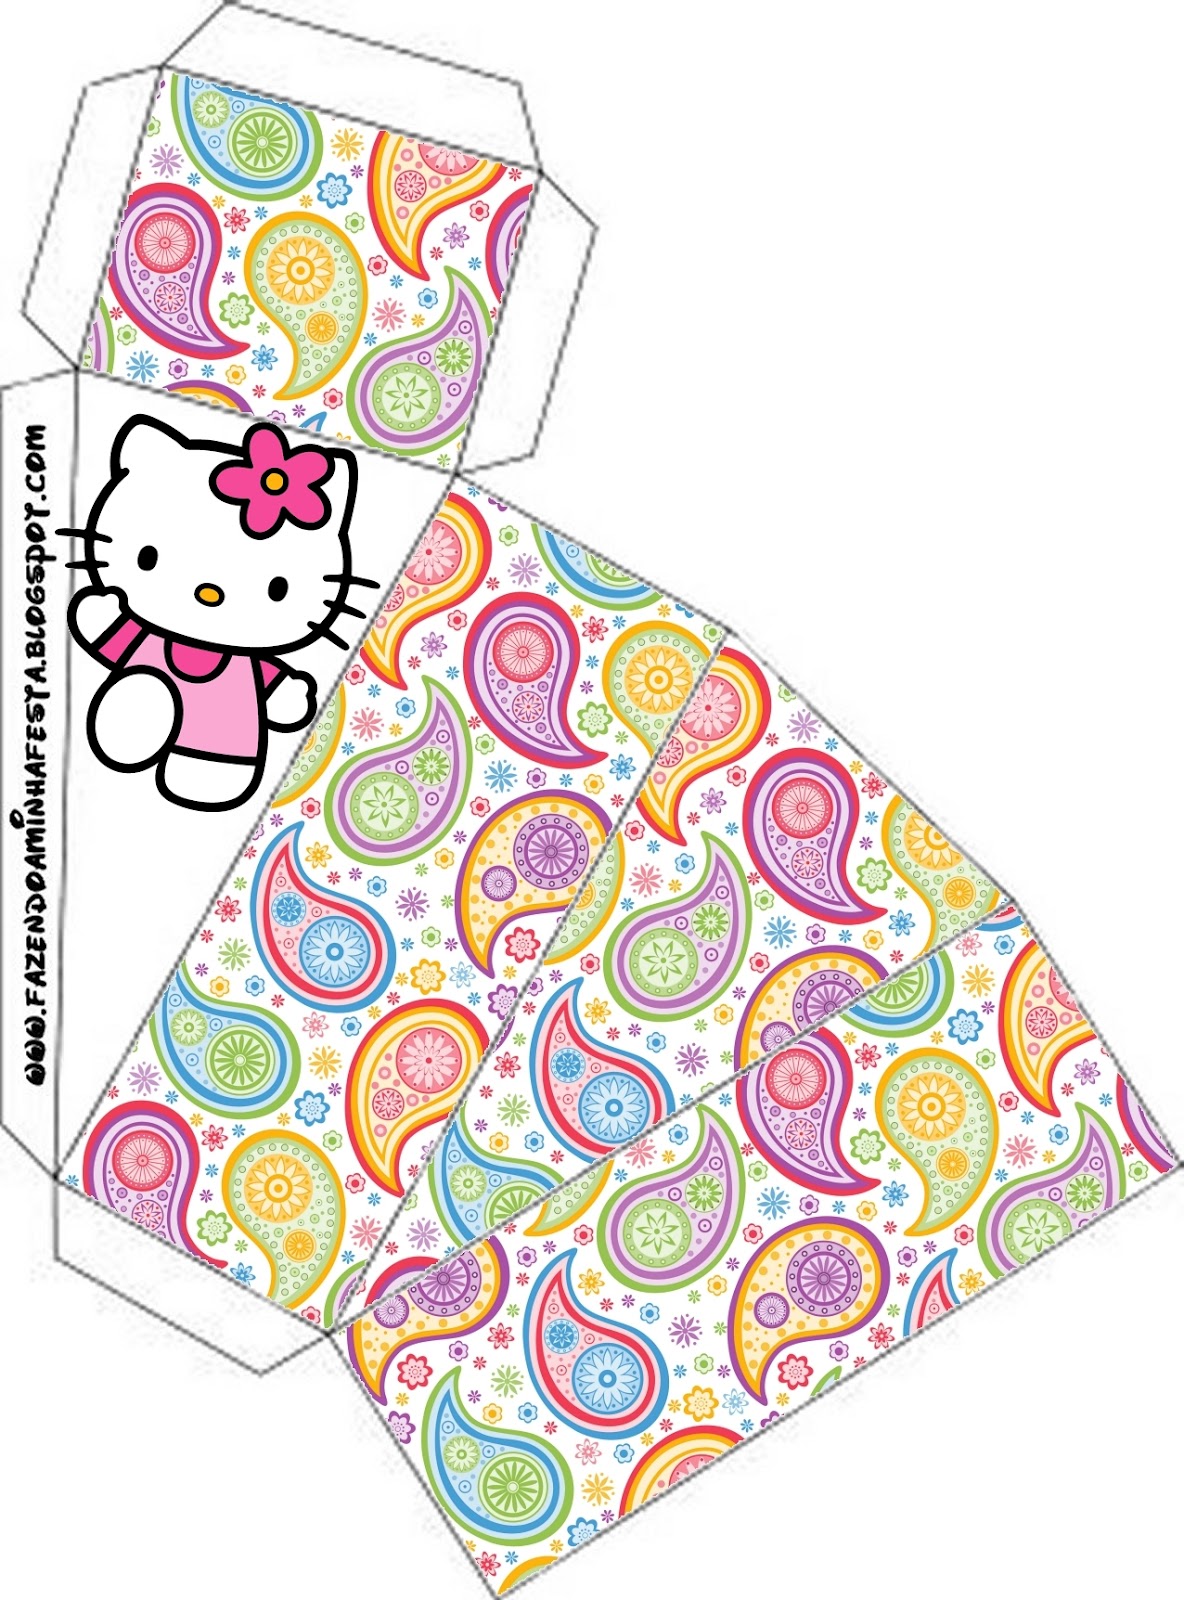 Hello Kitty Party: Free Printable Boxes. - Oh My Fiesta! in english